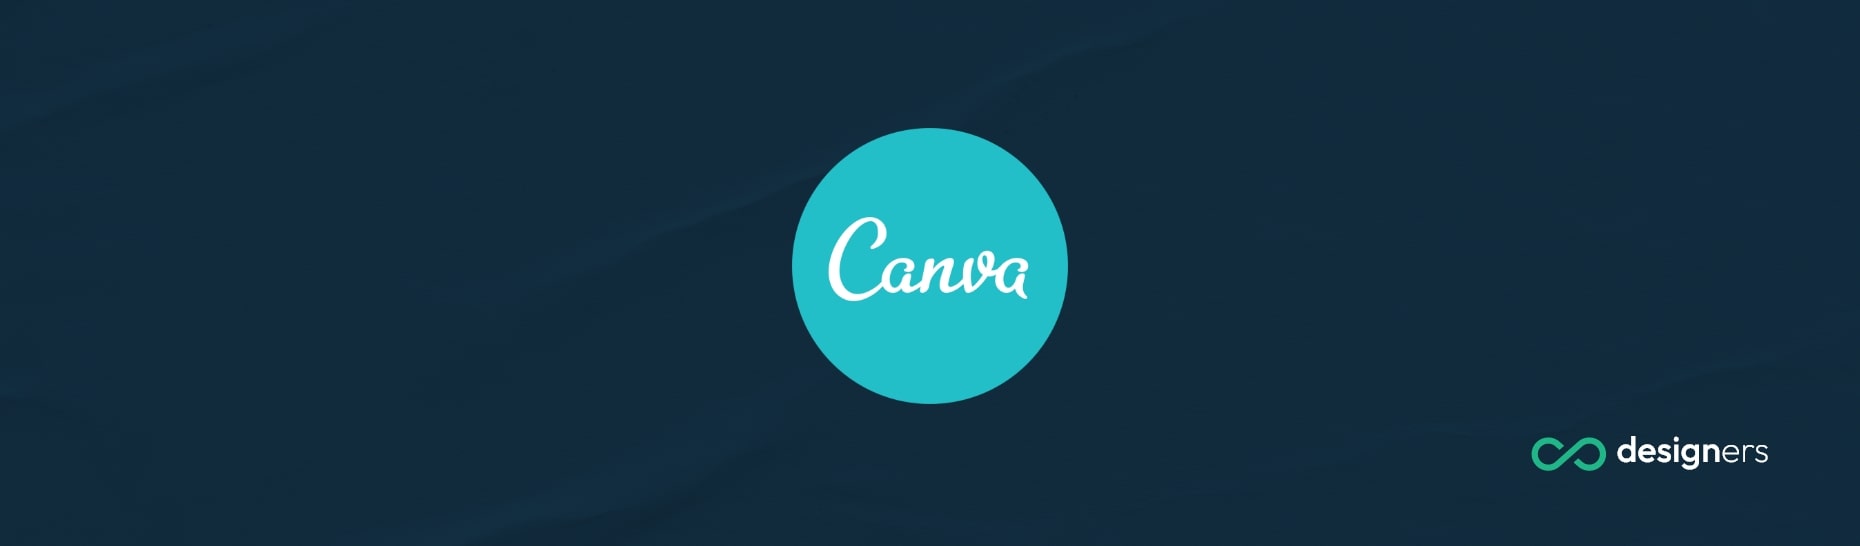 Is There a Heart Frame on Canva?